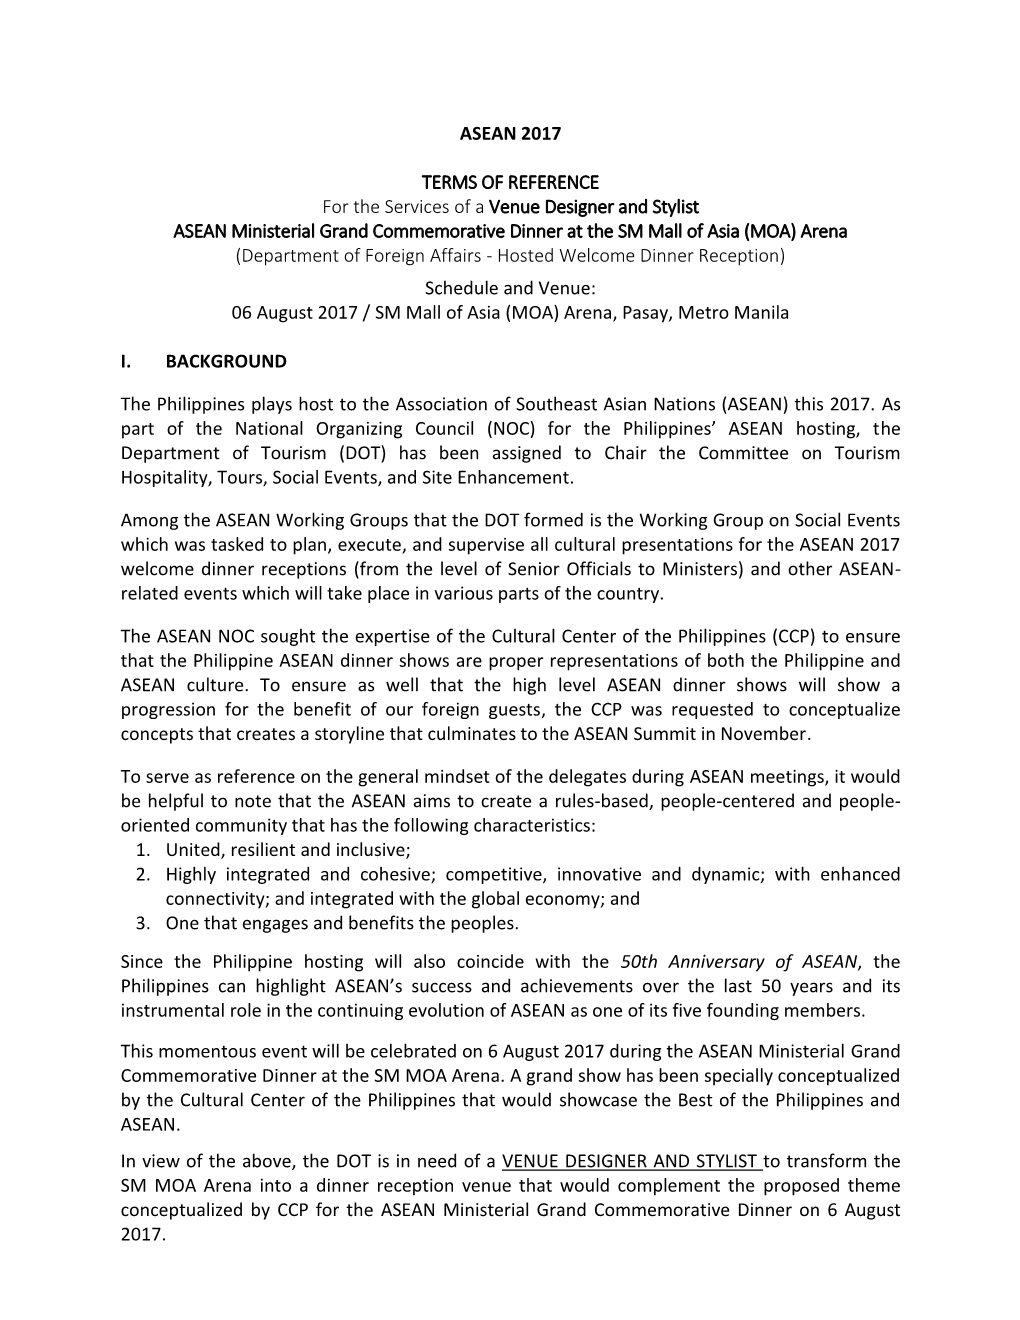 ASEAN 2017 TERMS of REFERENCE for the Services of A